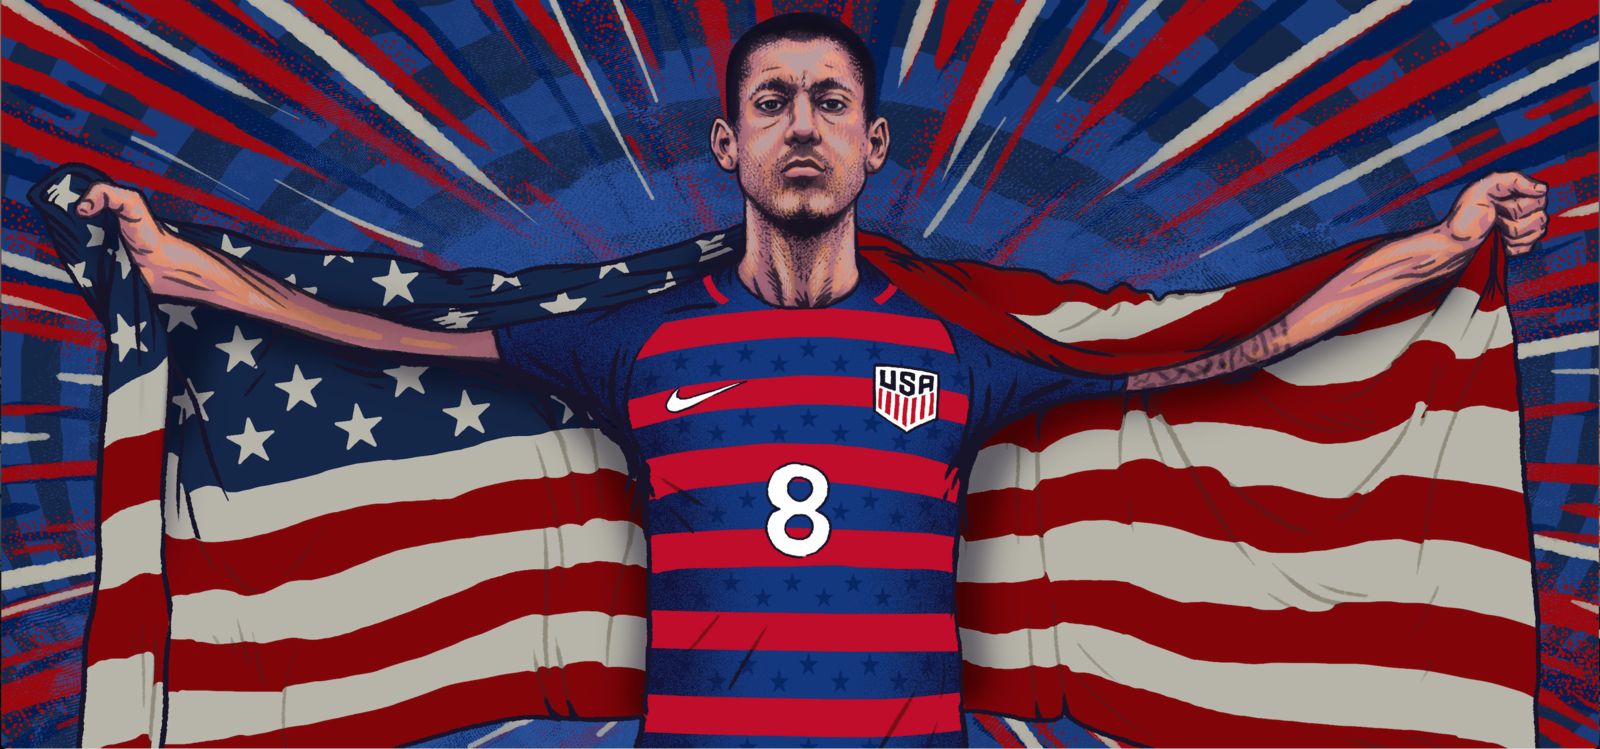 usa men's gold cup jersey